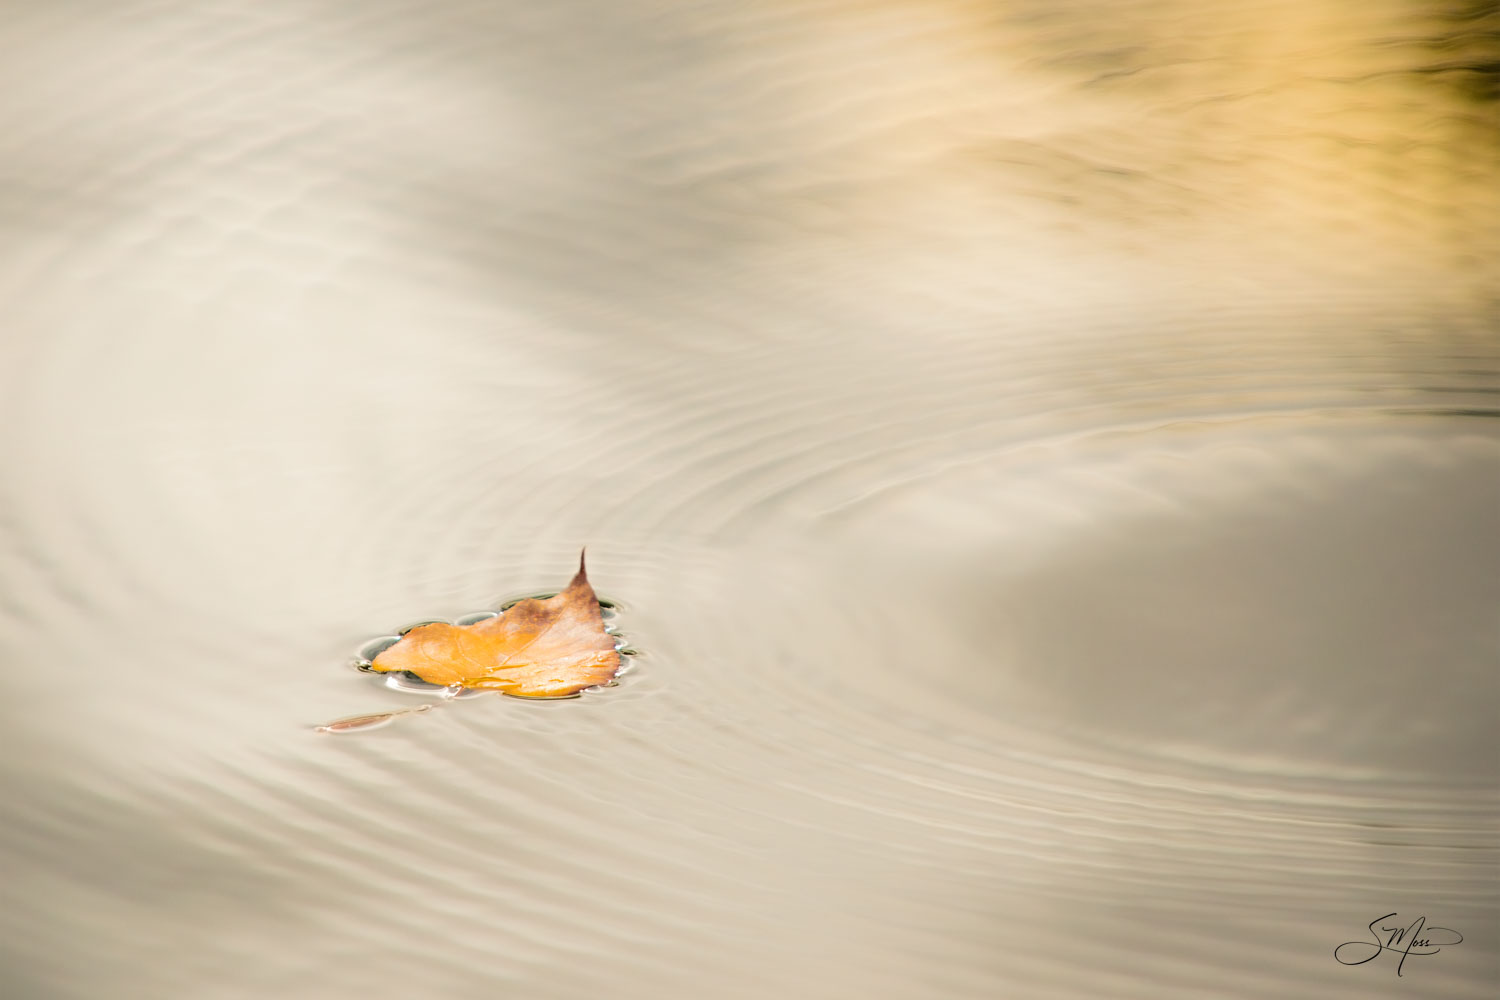 Single autumn leaf floating on water with reflection of tree with golden leaves in upper right corner.